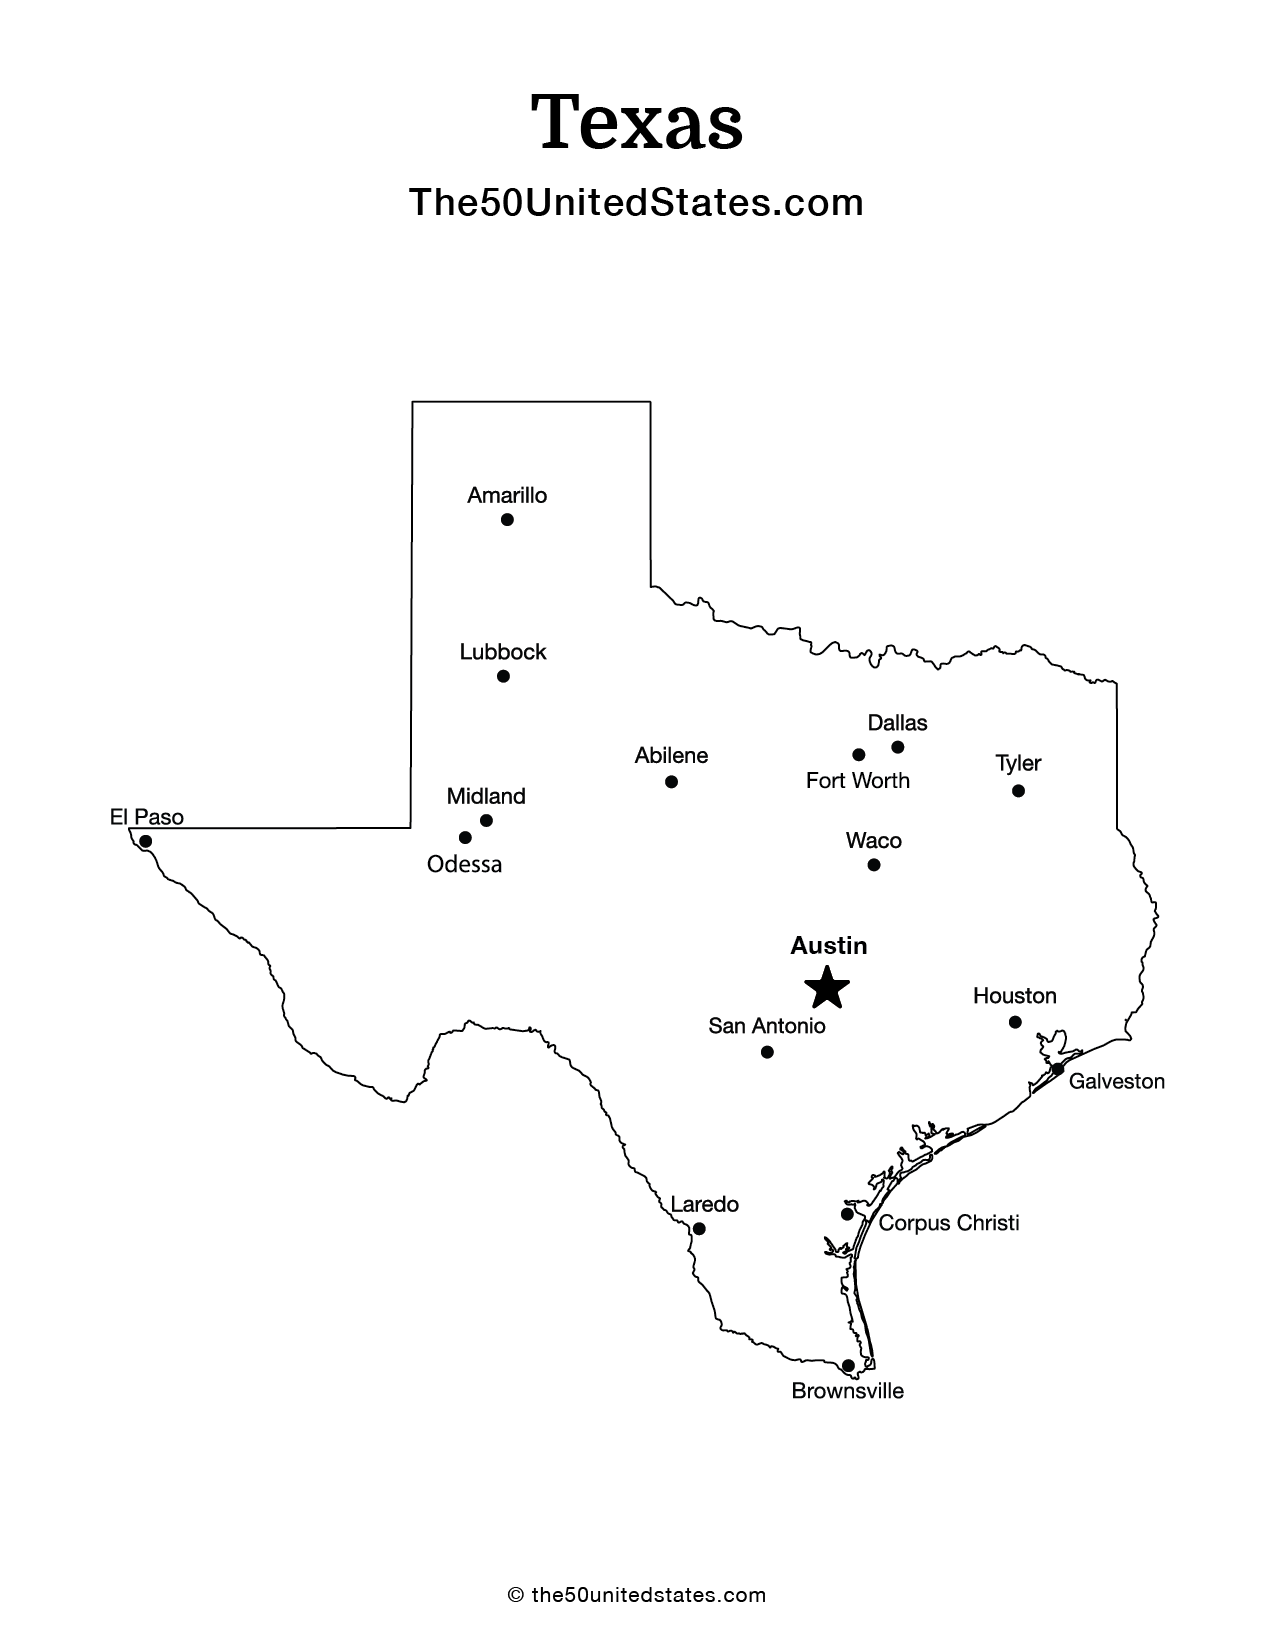 Map of Texas with Cities (Labeled)